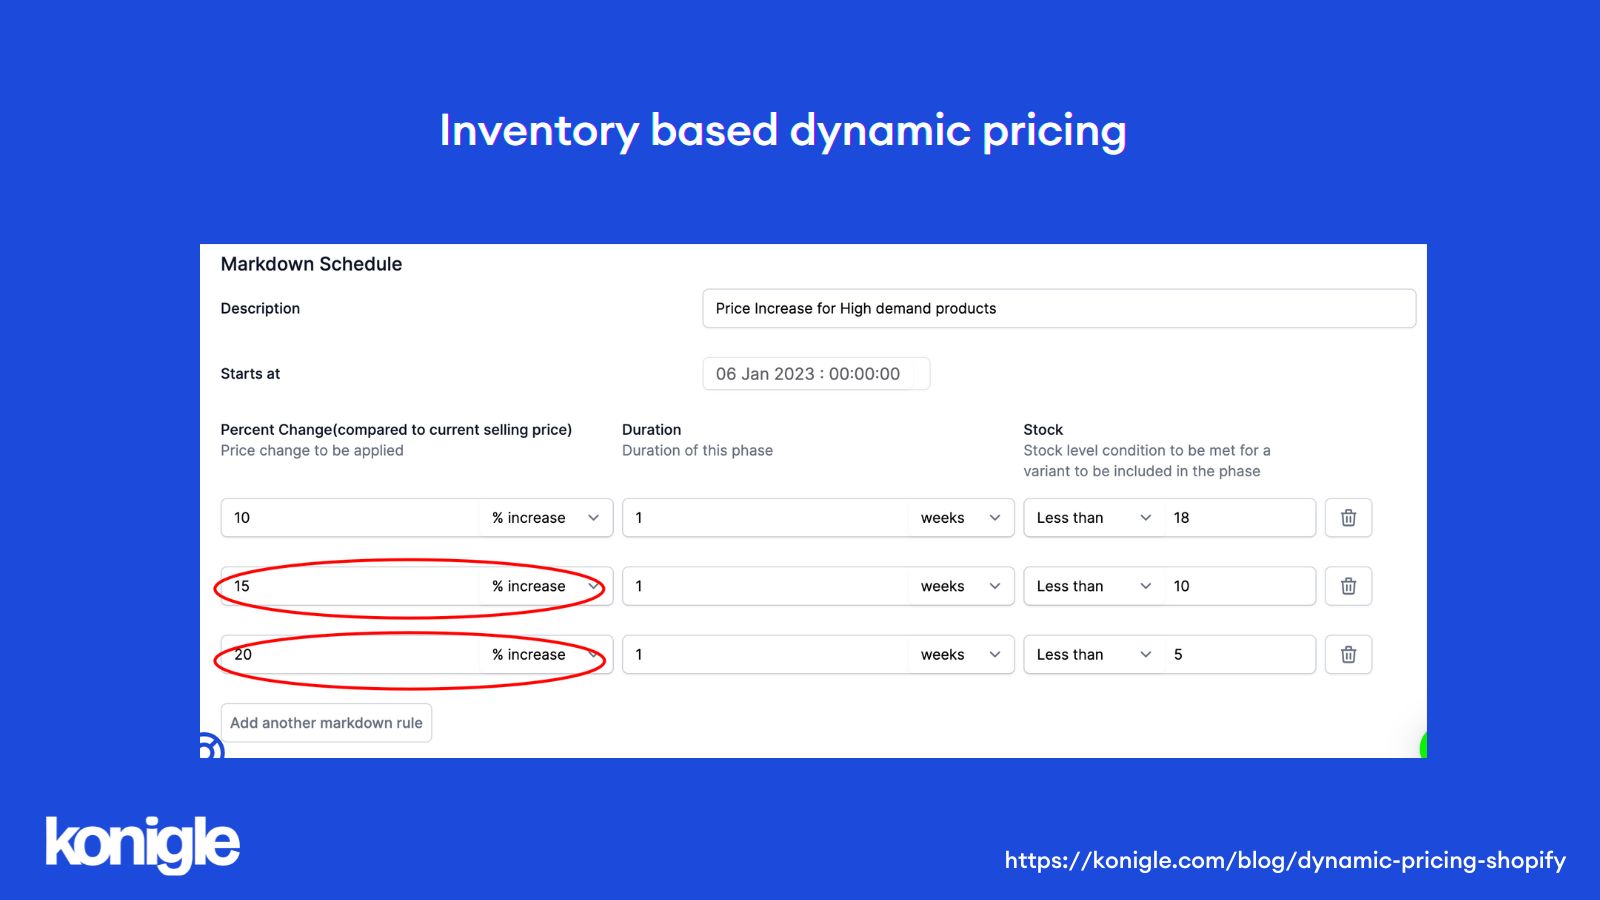 A pricing plan using Konigle’s Markdown Plan tool where users can create rules to increase or decrease their prices once a product hits a certain inventory level.